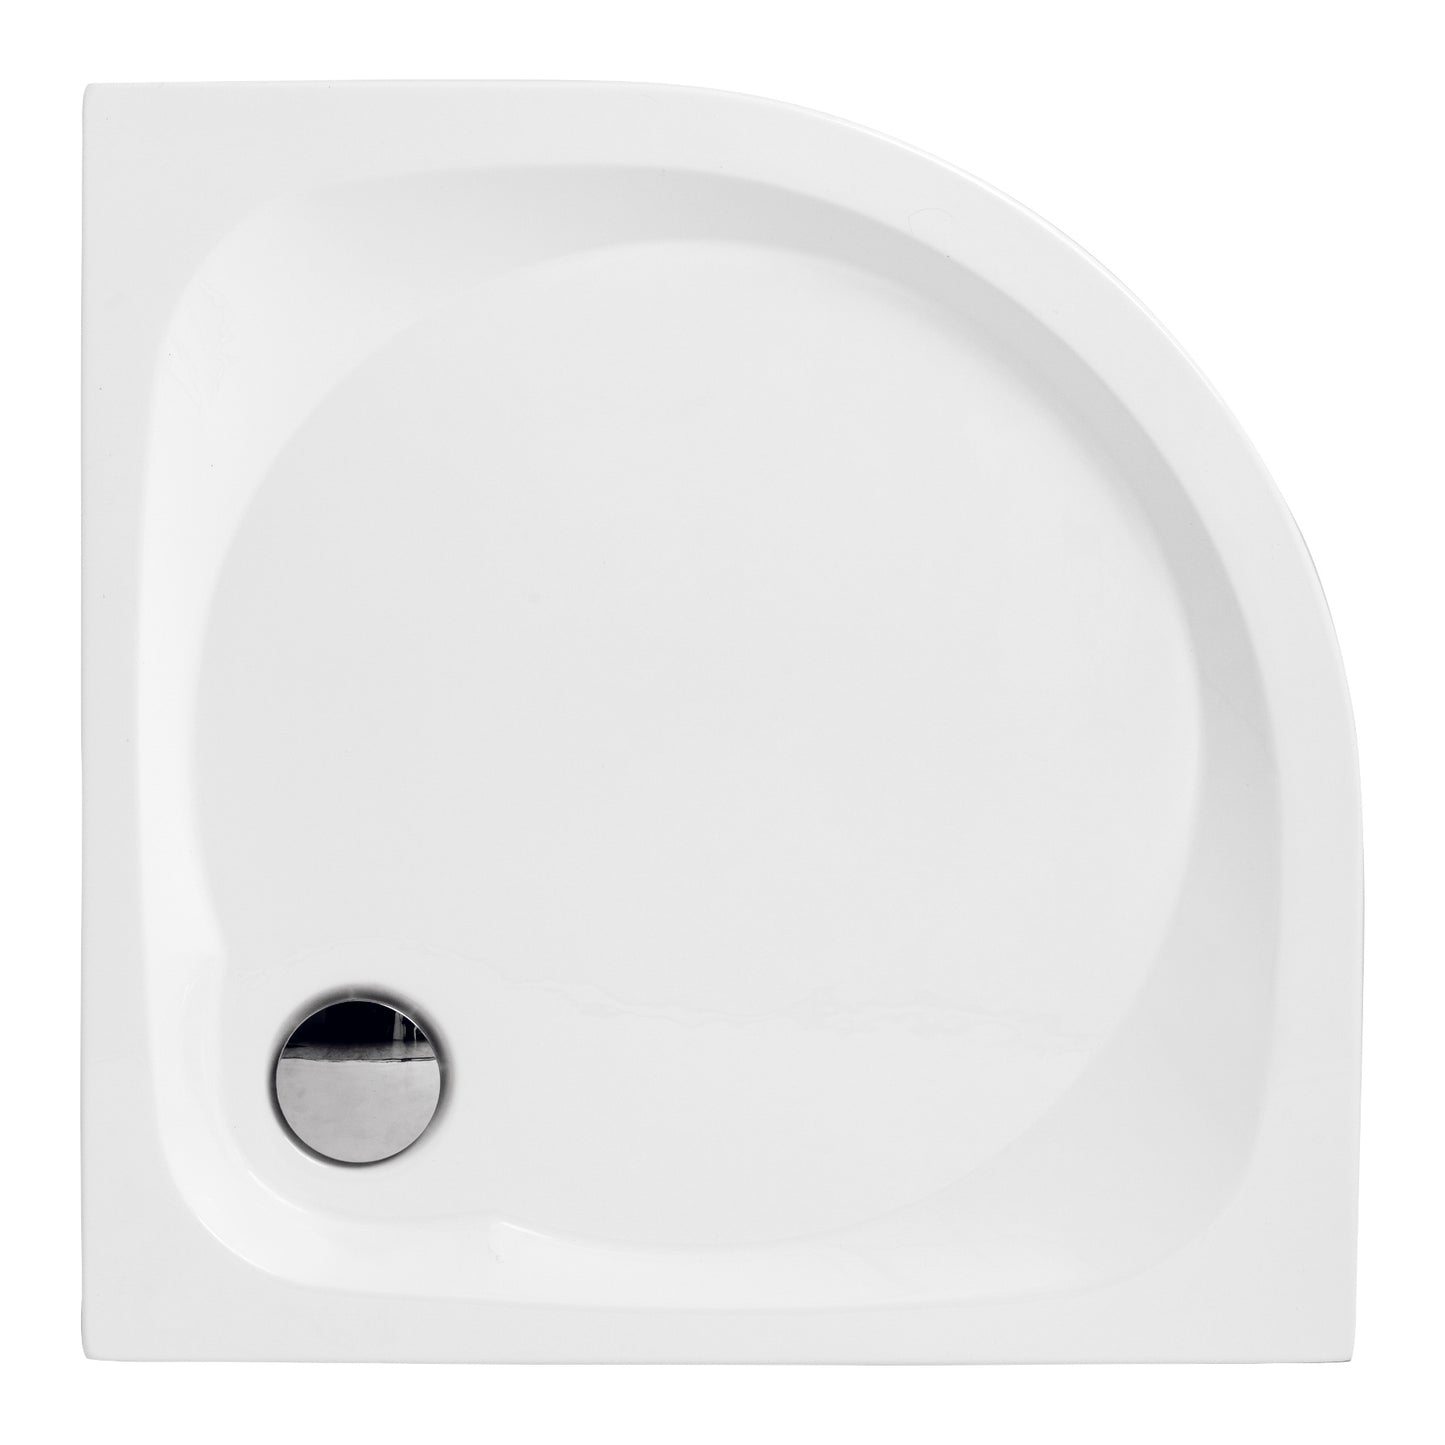 Load image into Gallery viewer, Acrylic semicircular compact shower base NOWY STYL
